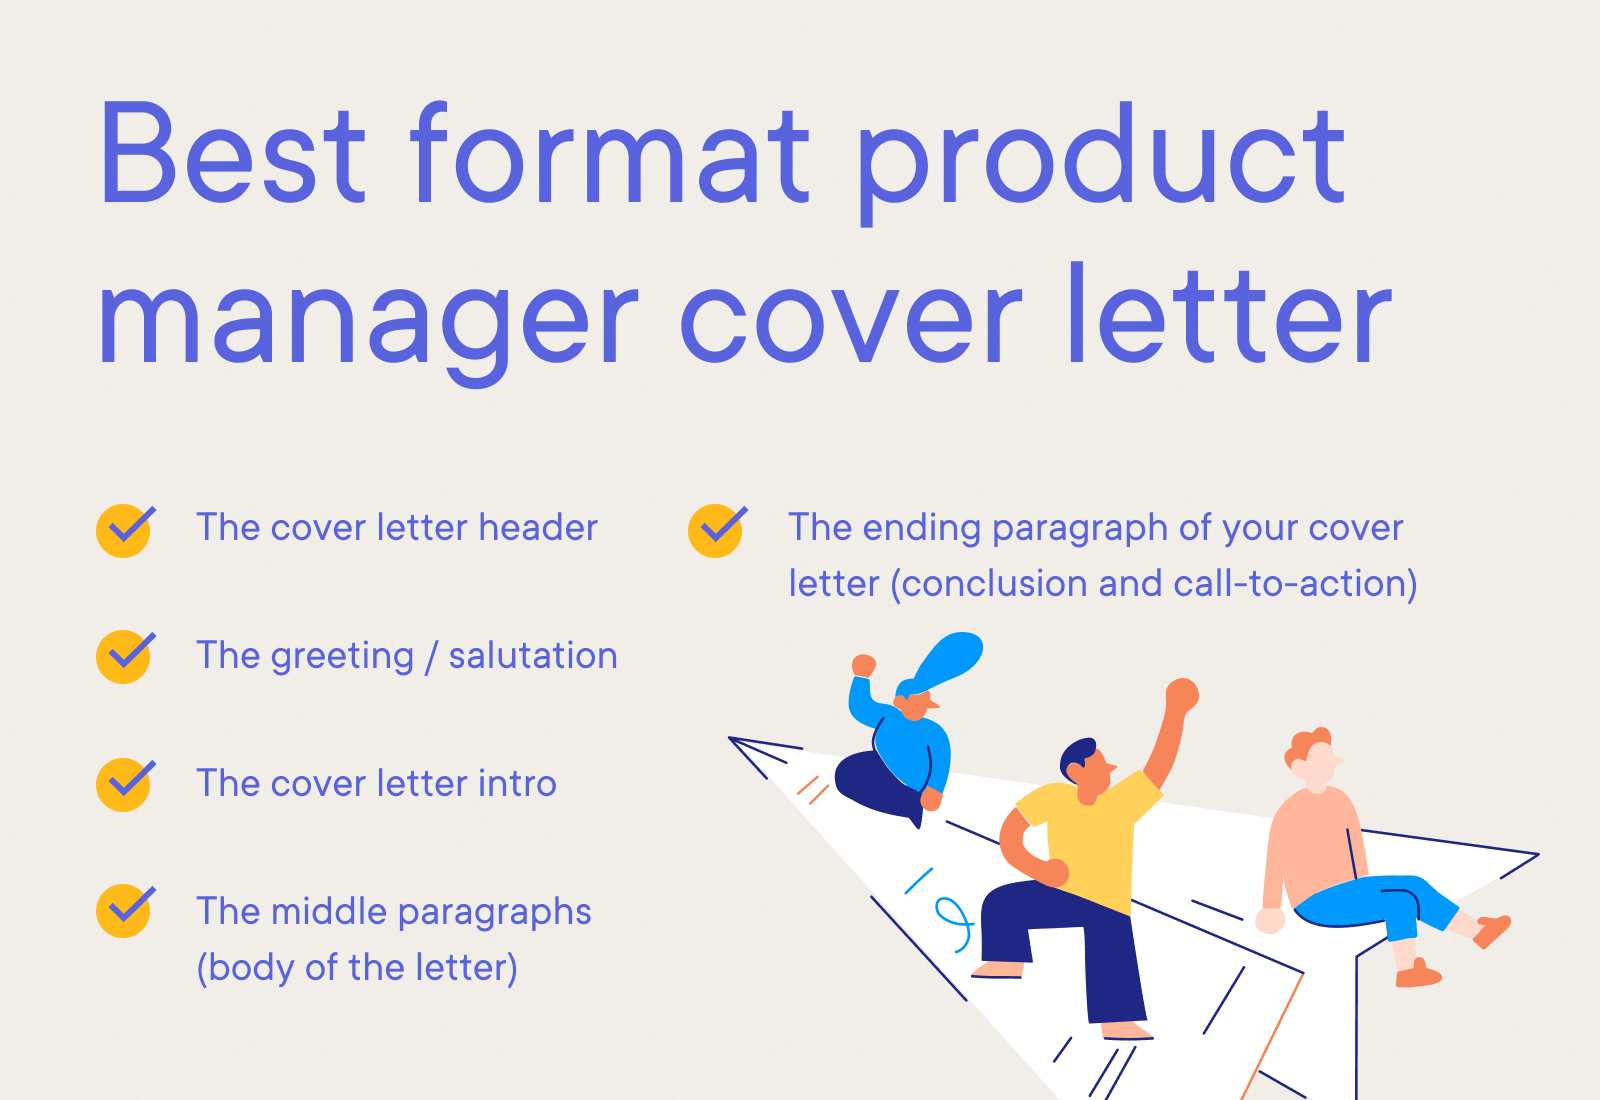 Product Manager - Best format for a product manager cover letter